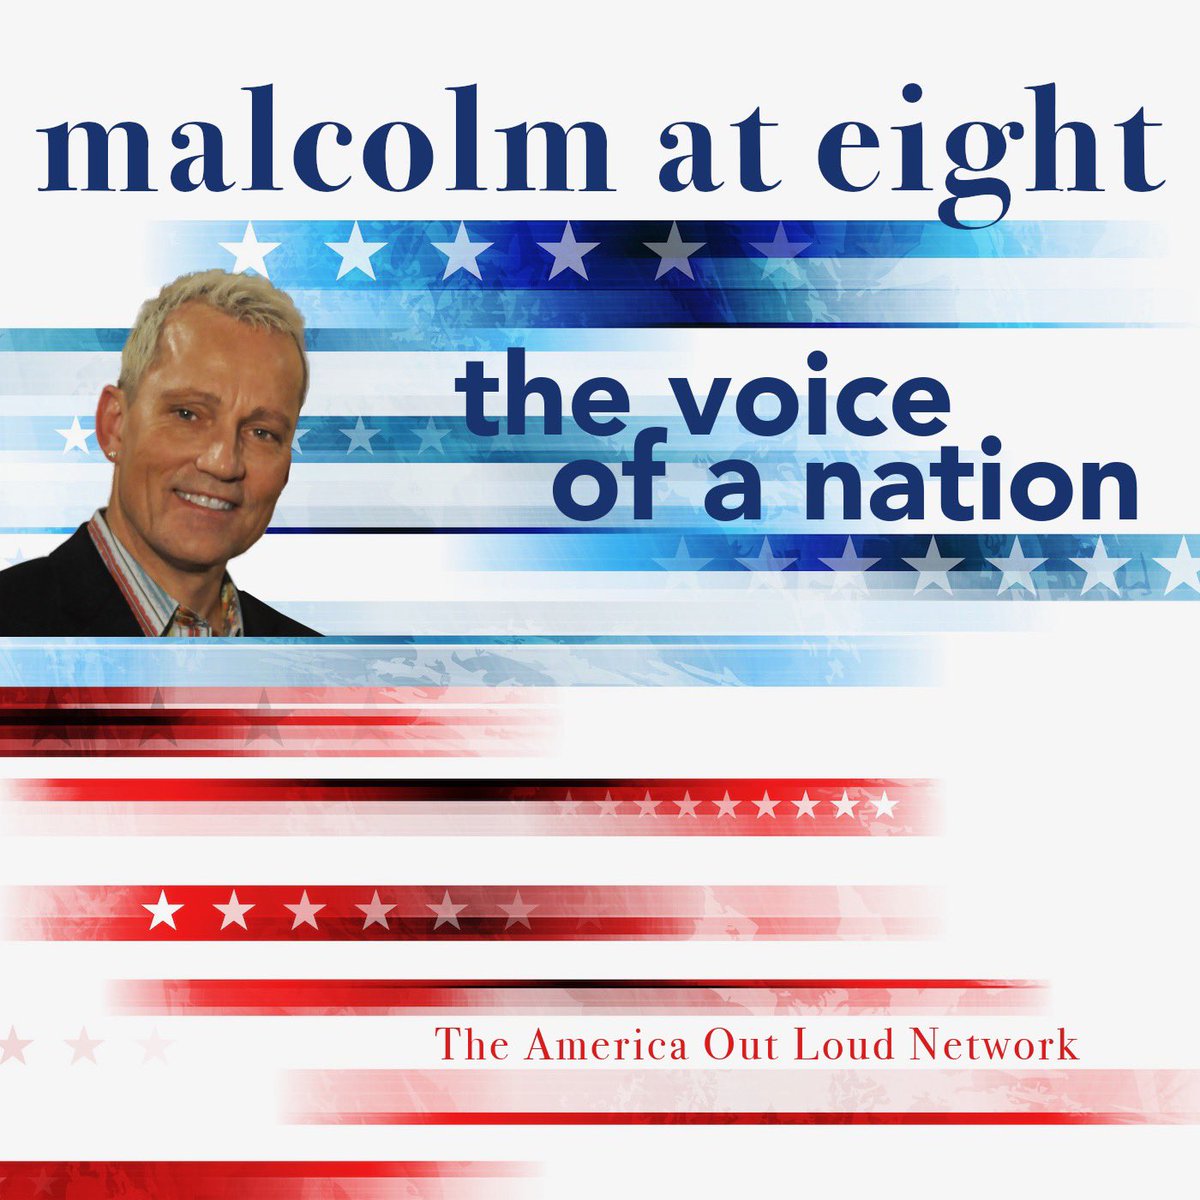 🇺🇸 PREMIERE LAUNCH 🇺🇸

#Thursday 8 pm EST 

@MalcolmOutLoud at eight
Catch the brand new launch of Malcolm at eight, the relaunch of #TheVoiceOfANation with a whole new twist, weekdays at 
8 pm on #AmericaOutLoudTalkRadio

#GetLoudAmerica 🇺🇸